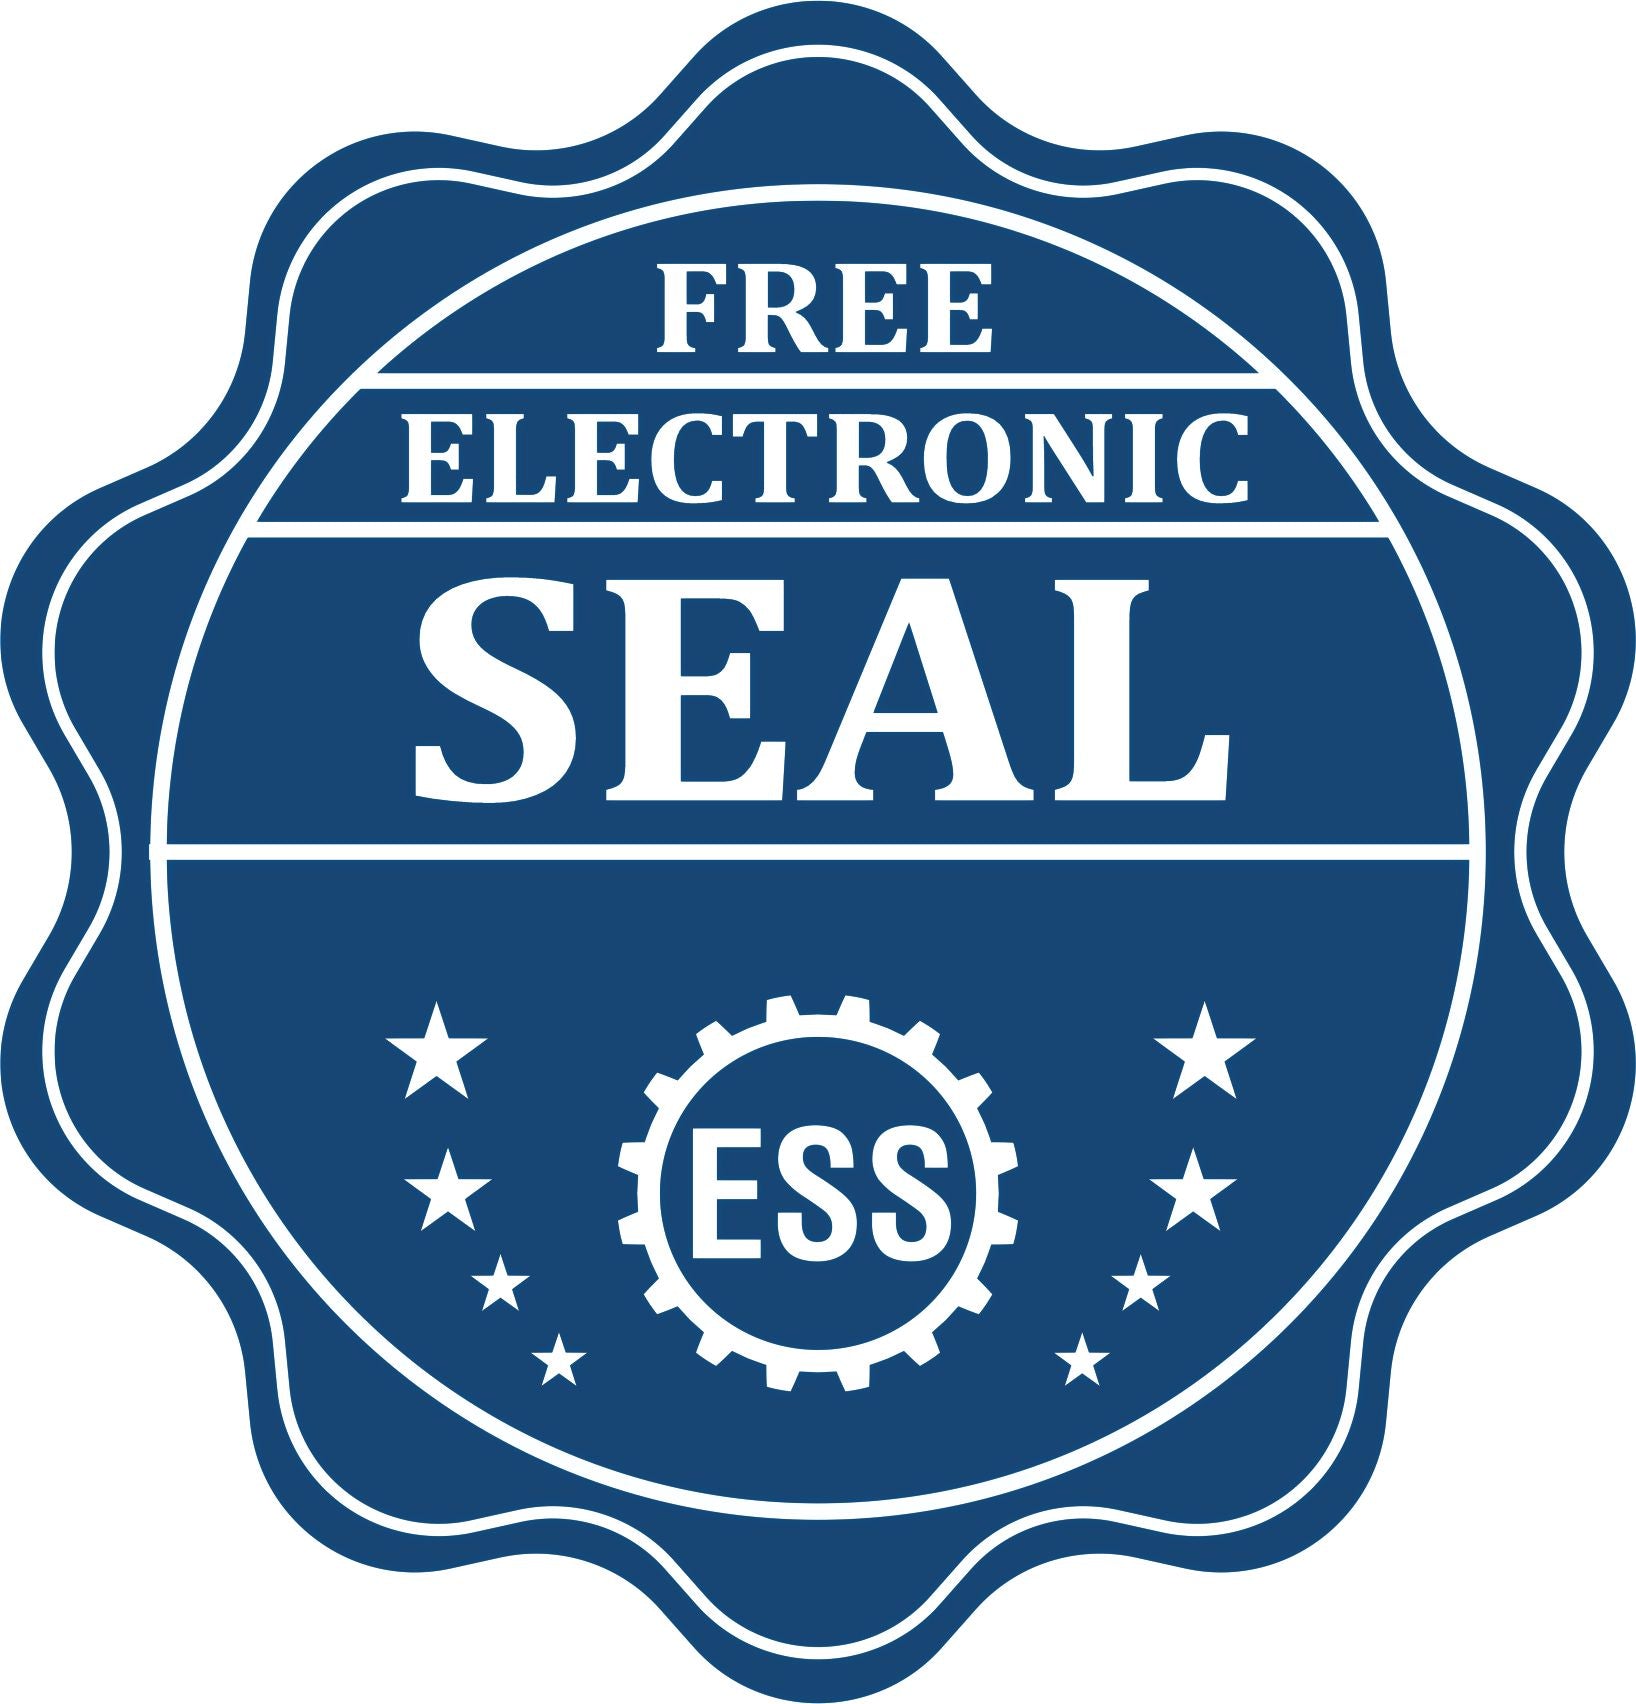 A badge showing a free electronic seal for the State of Washington Extended Long Reach Engineer Seal with stars and the ESS gear on the emblem.